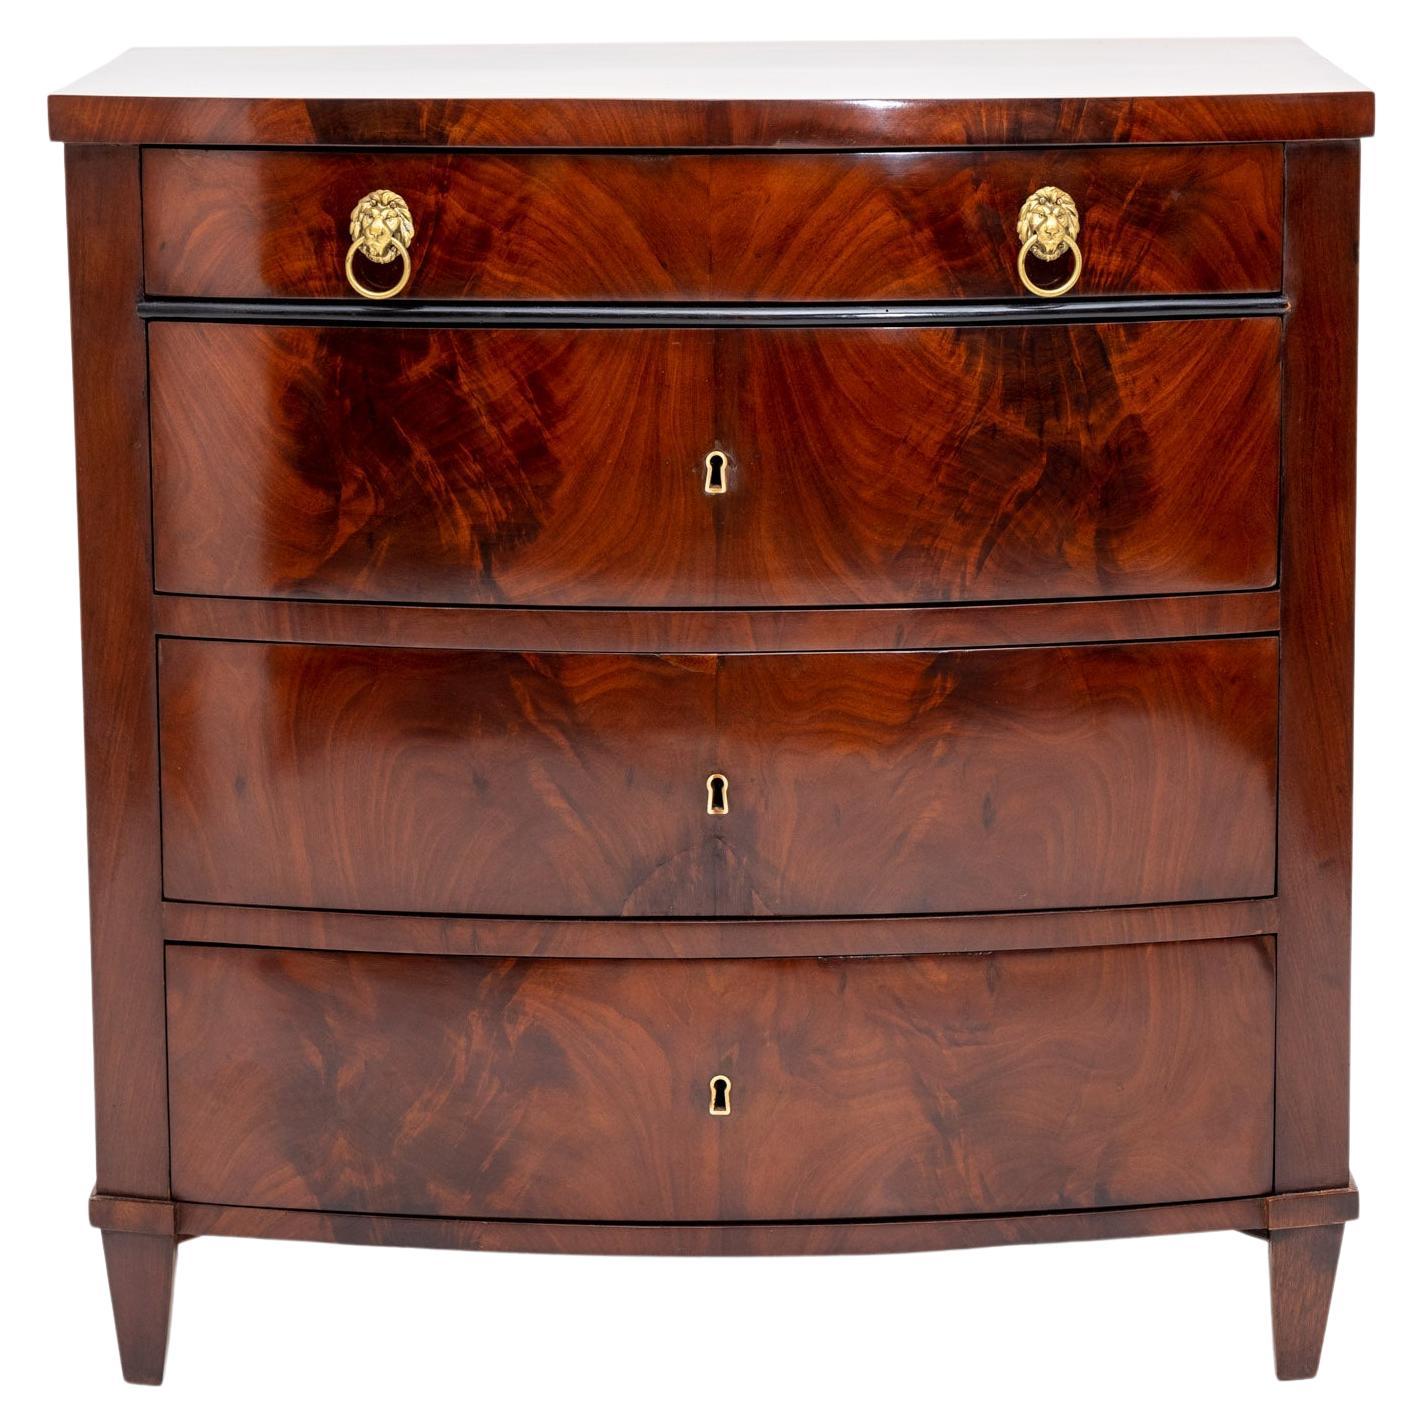 Chest of Drawers, Early 19th Century